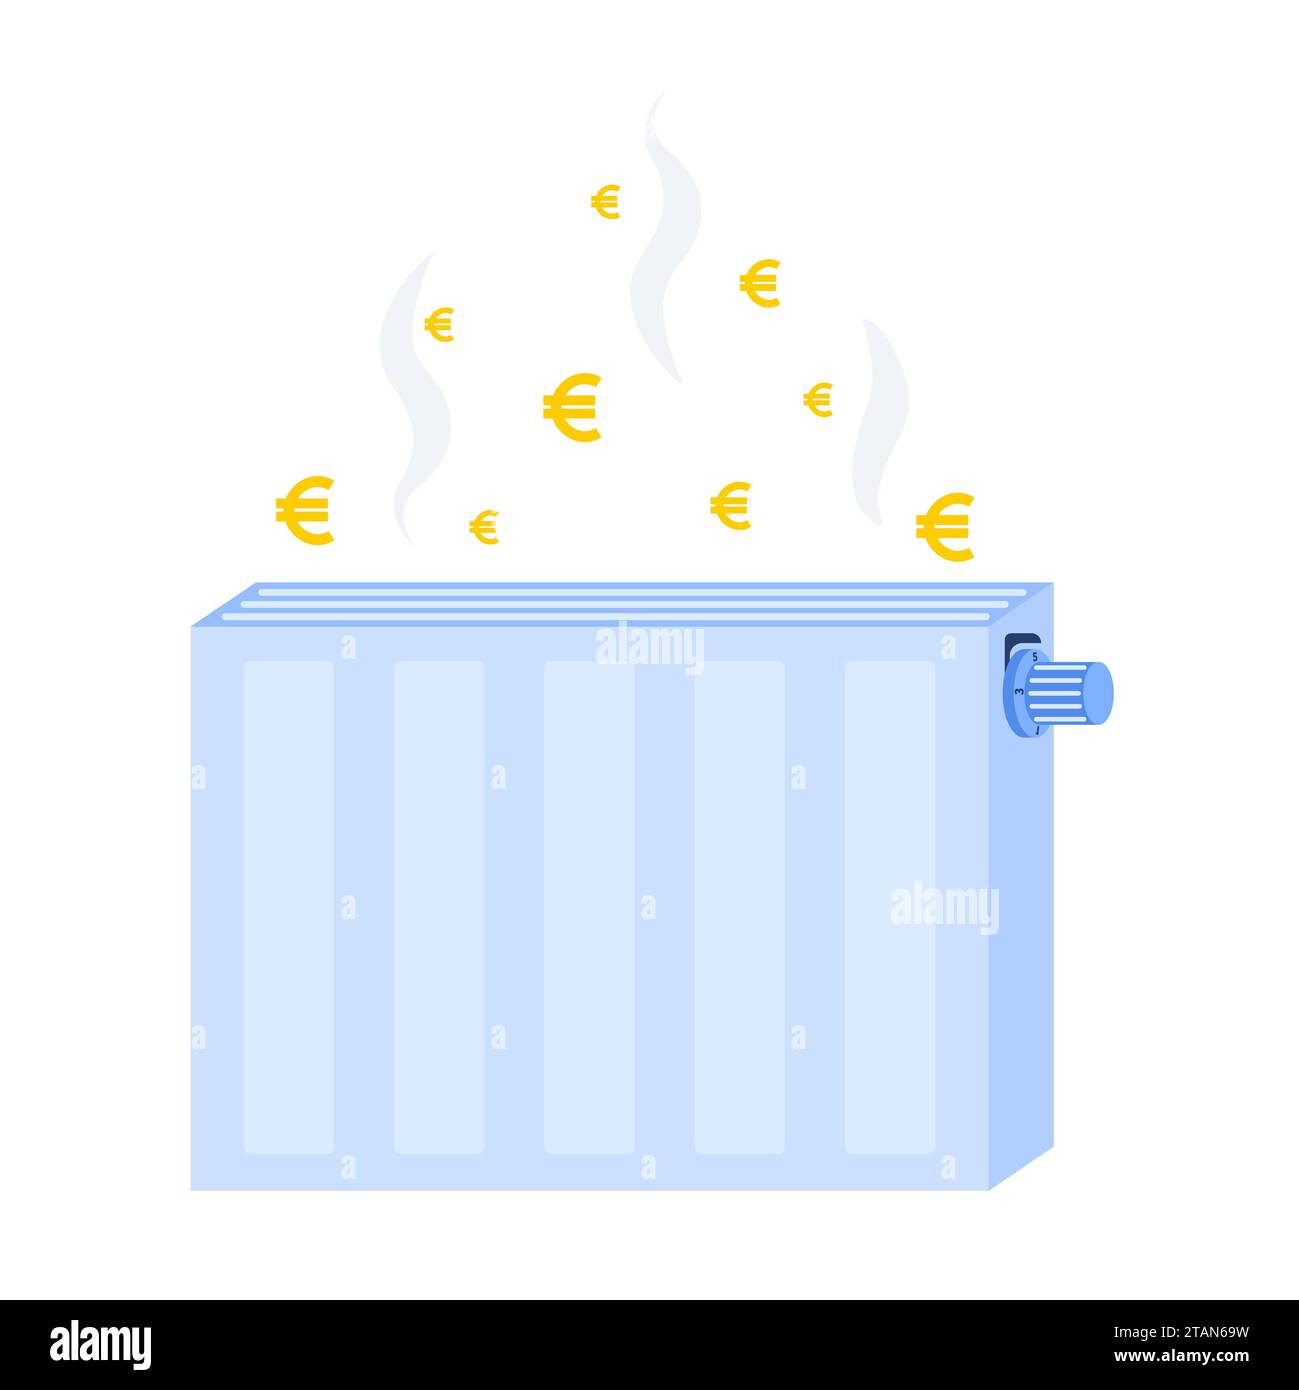 Energy costs, conceptual illustration Stock Photo